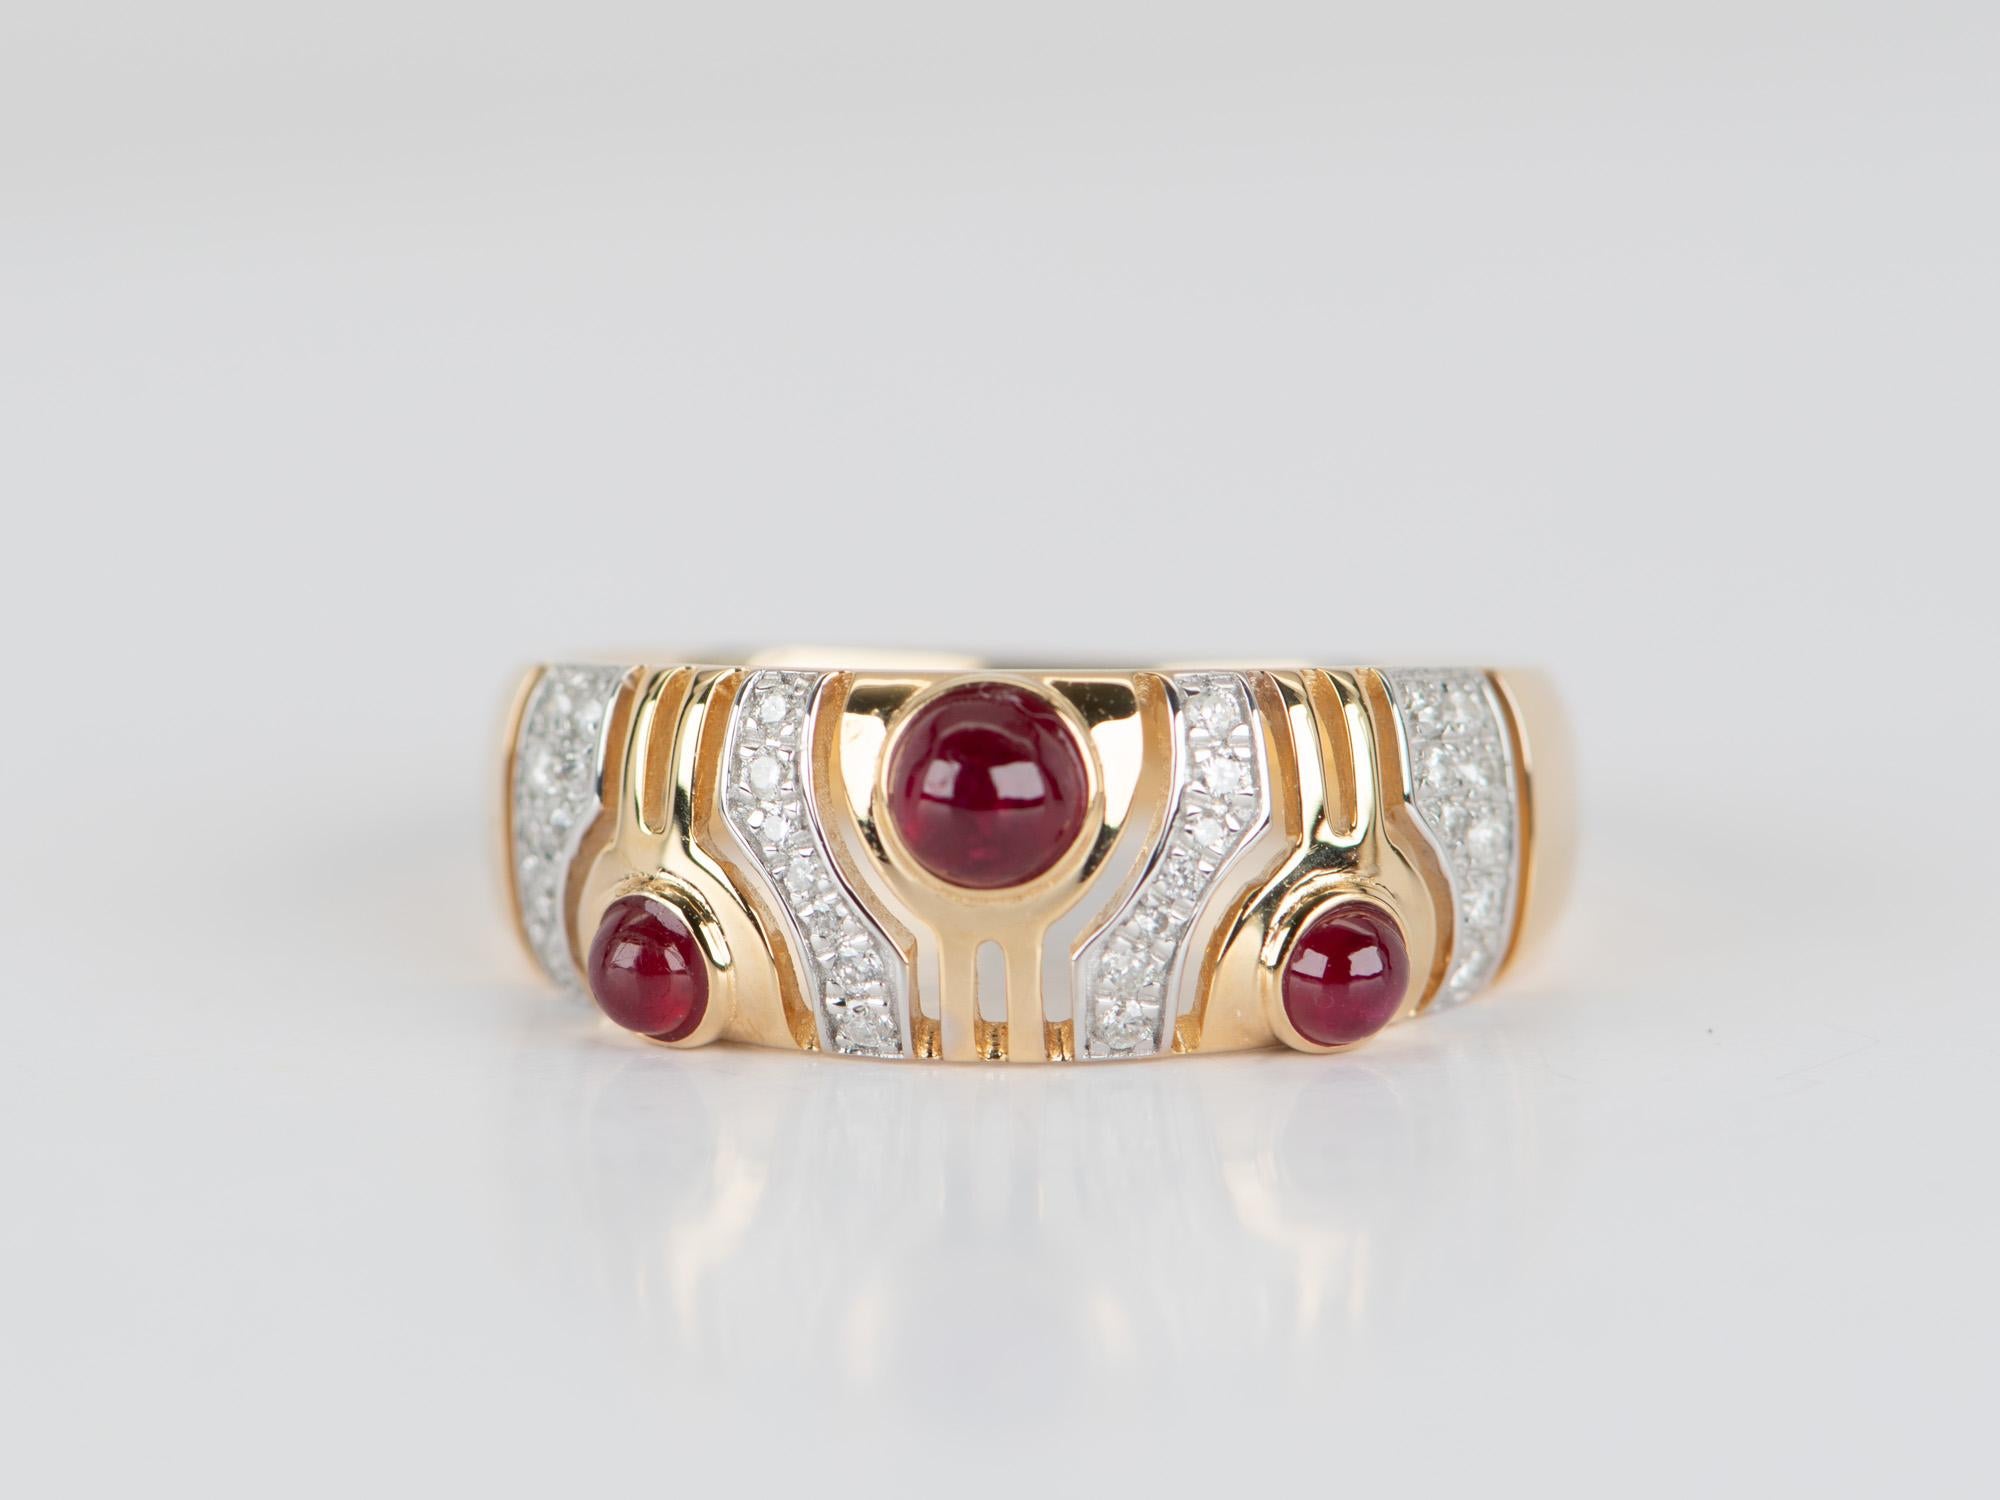 ♥ 18K Gold Ruby and Diamond Wedding Band Light Weight R5072
♥ The item measures 6.9mm in length, 18mm in width, and 3.5mm in thickness. Band width is 2.8mm.

♥ Ring size: US Size 6.75 (Free resizing up or down 1 size)
♥ Material: 18K Gold
♥